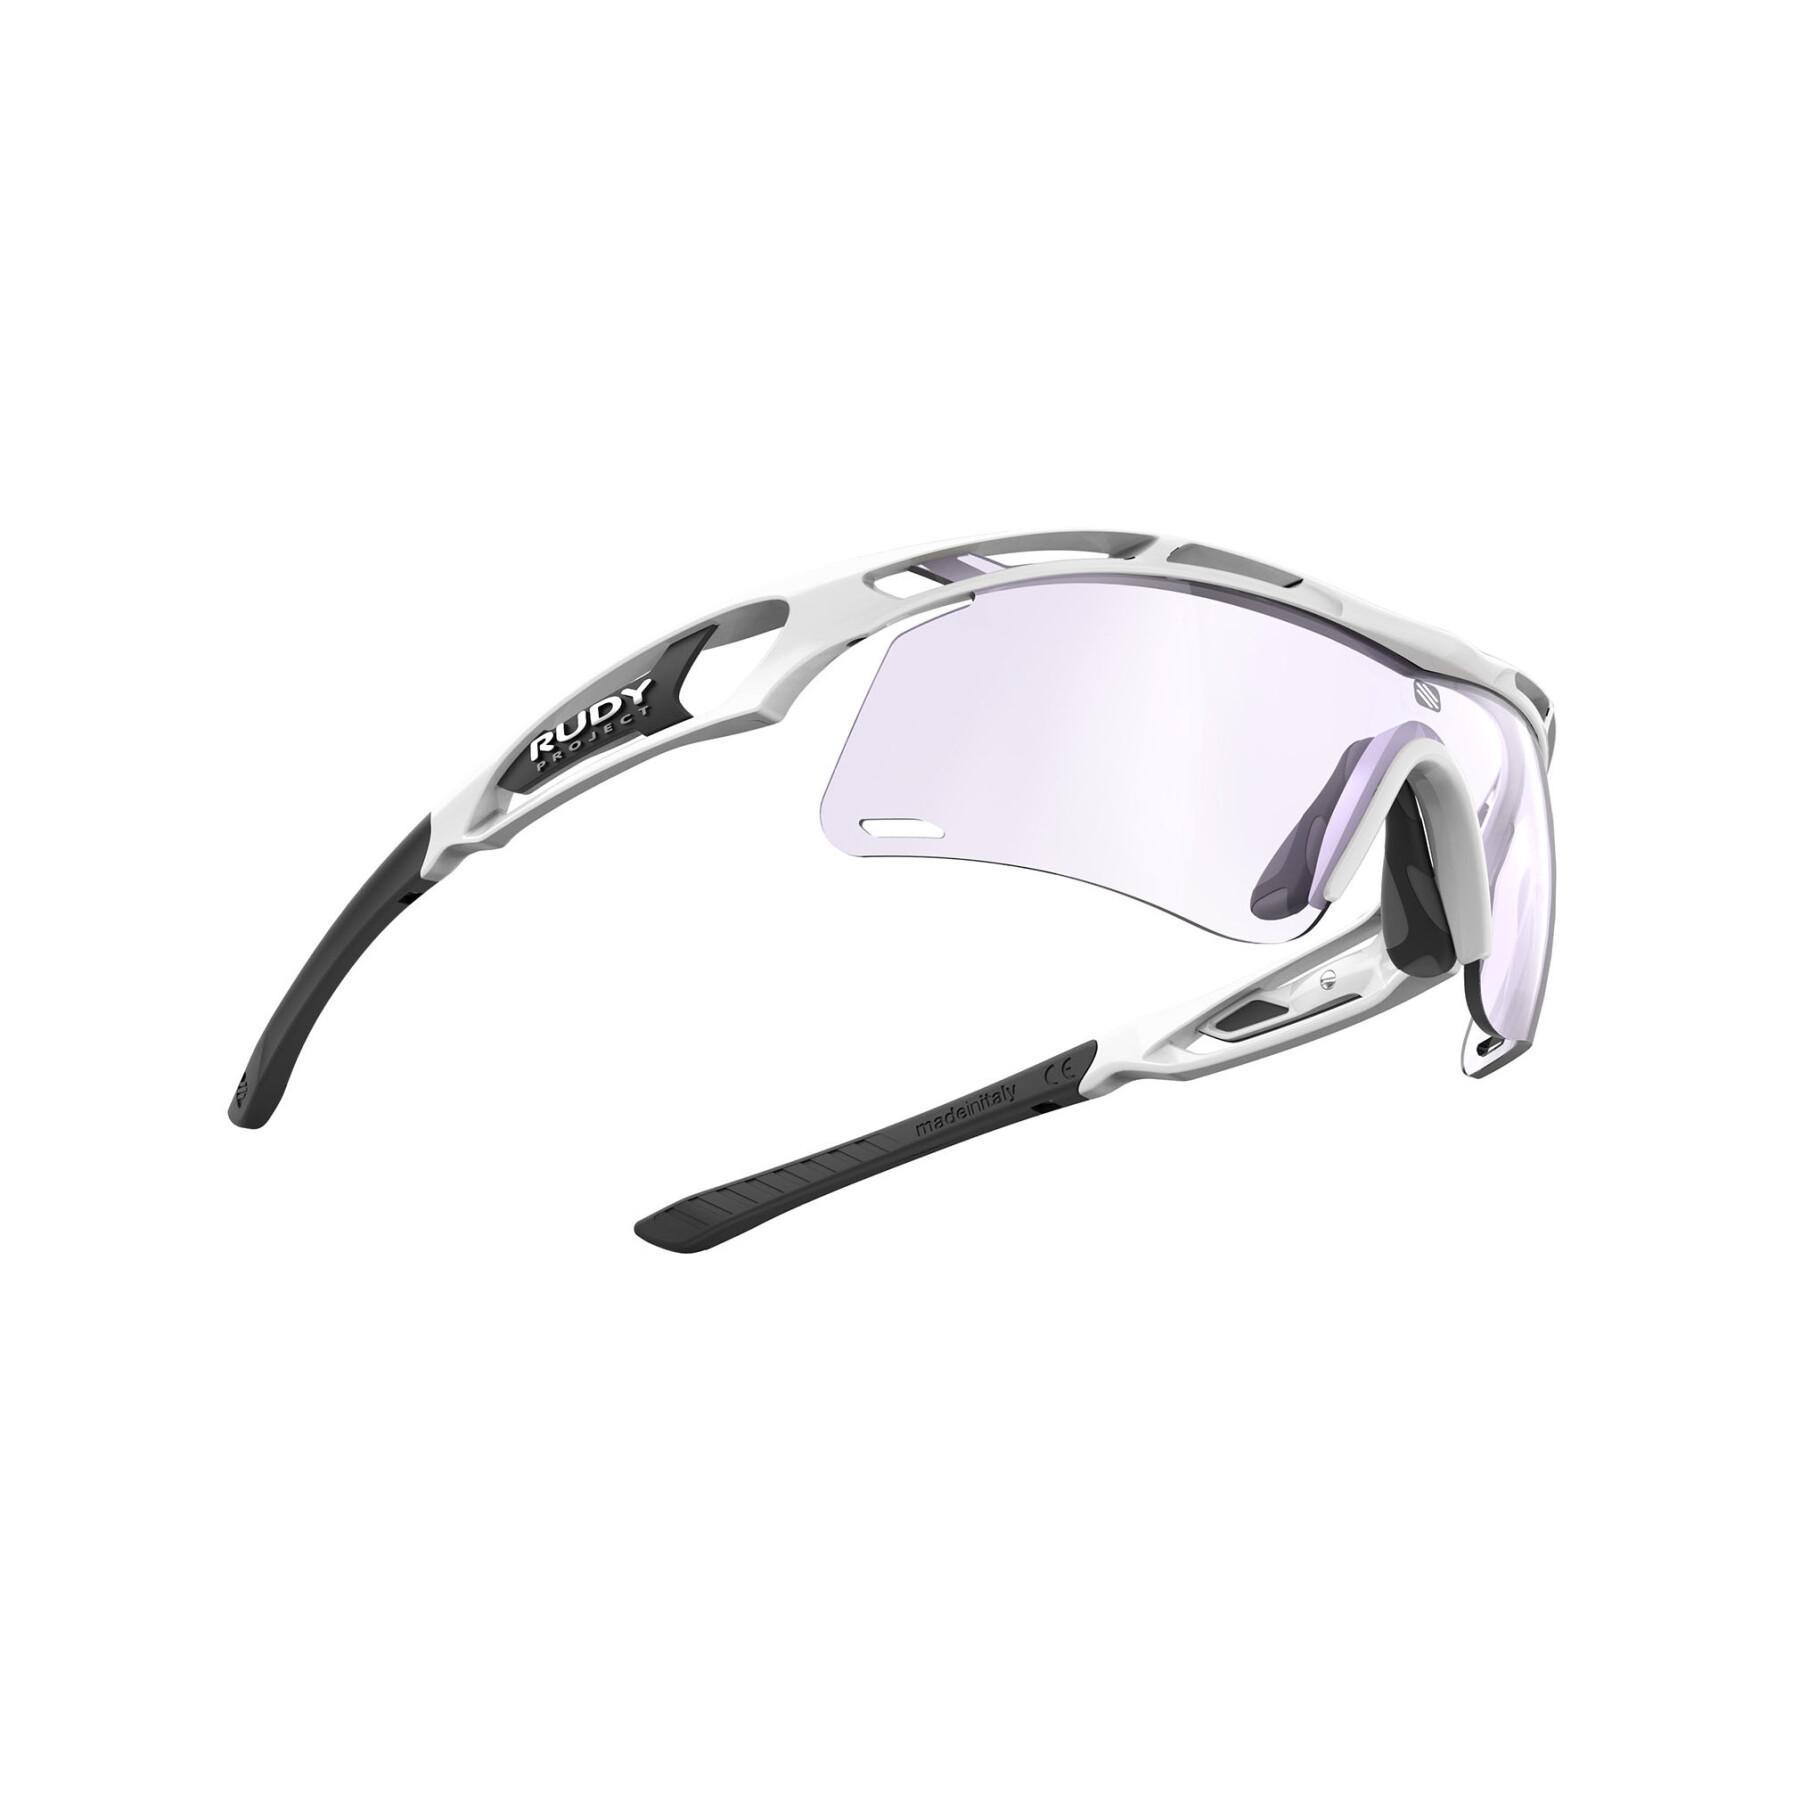 Performance glasses Rudy Project tralyx slim +